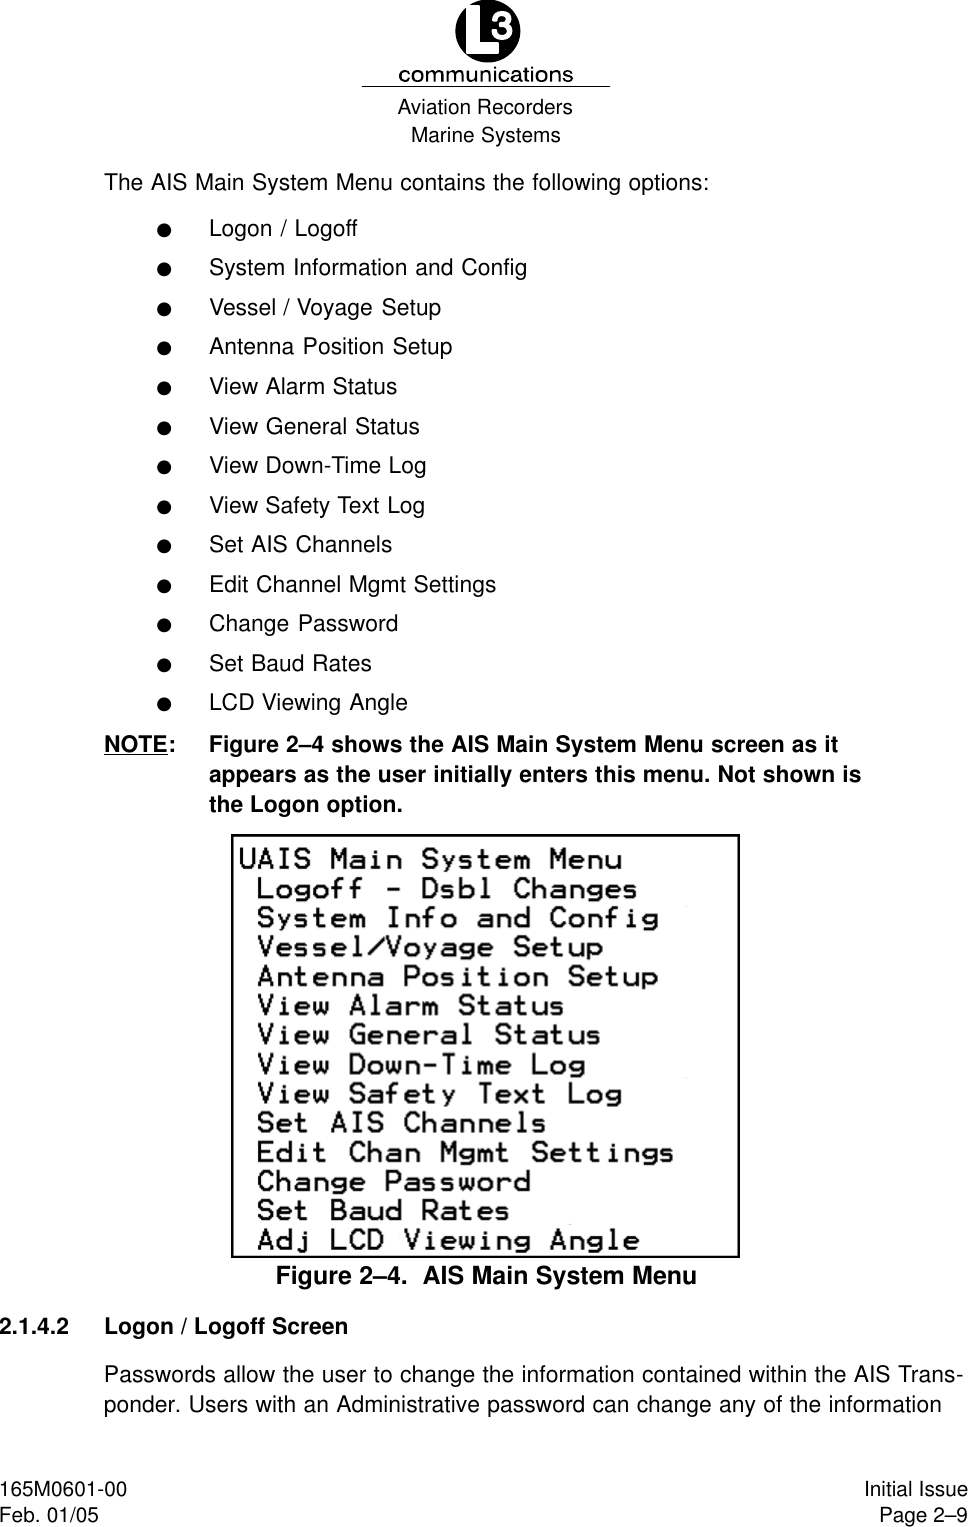 Marine SystemsAviation RecordersPage 2–9Initial Issue165M0601-00Feb. 01/05The AIS Main System Menu contains the following options:FLogon / LogoffFSystem Information and ConfigFVessel / Voyage SetupFAntenna Position SetupFView Alarm StatusFView General StatusFView Down-Time LogFView Safety Text LogFSet AIS ChannelsFEdit Channel Mgmt SettingsFChange PasswordFSet Baud RatesFLCD Viewing AngleNOTE: Figure 2–4 shows the AIS Main System Menu screen as itappears as the user initially enters this menu. Not shown isthe Logon option.Figure 2–4.  AIS Main System Menu2.1.4.2 Logon / Logoff ScreenPasswords allow the user to change the information contained within the AIS Trans-ponder. Users with an Administrative password can change any of the information